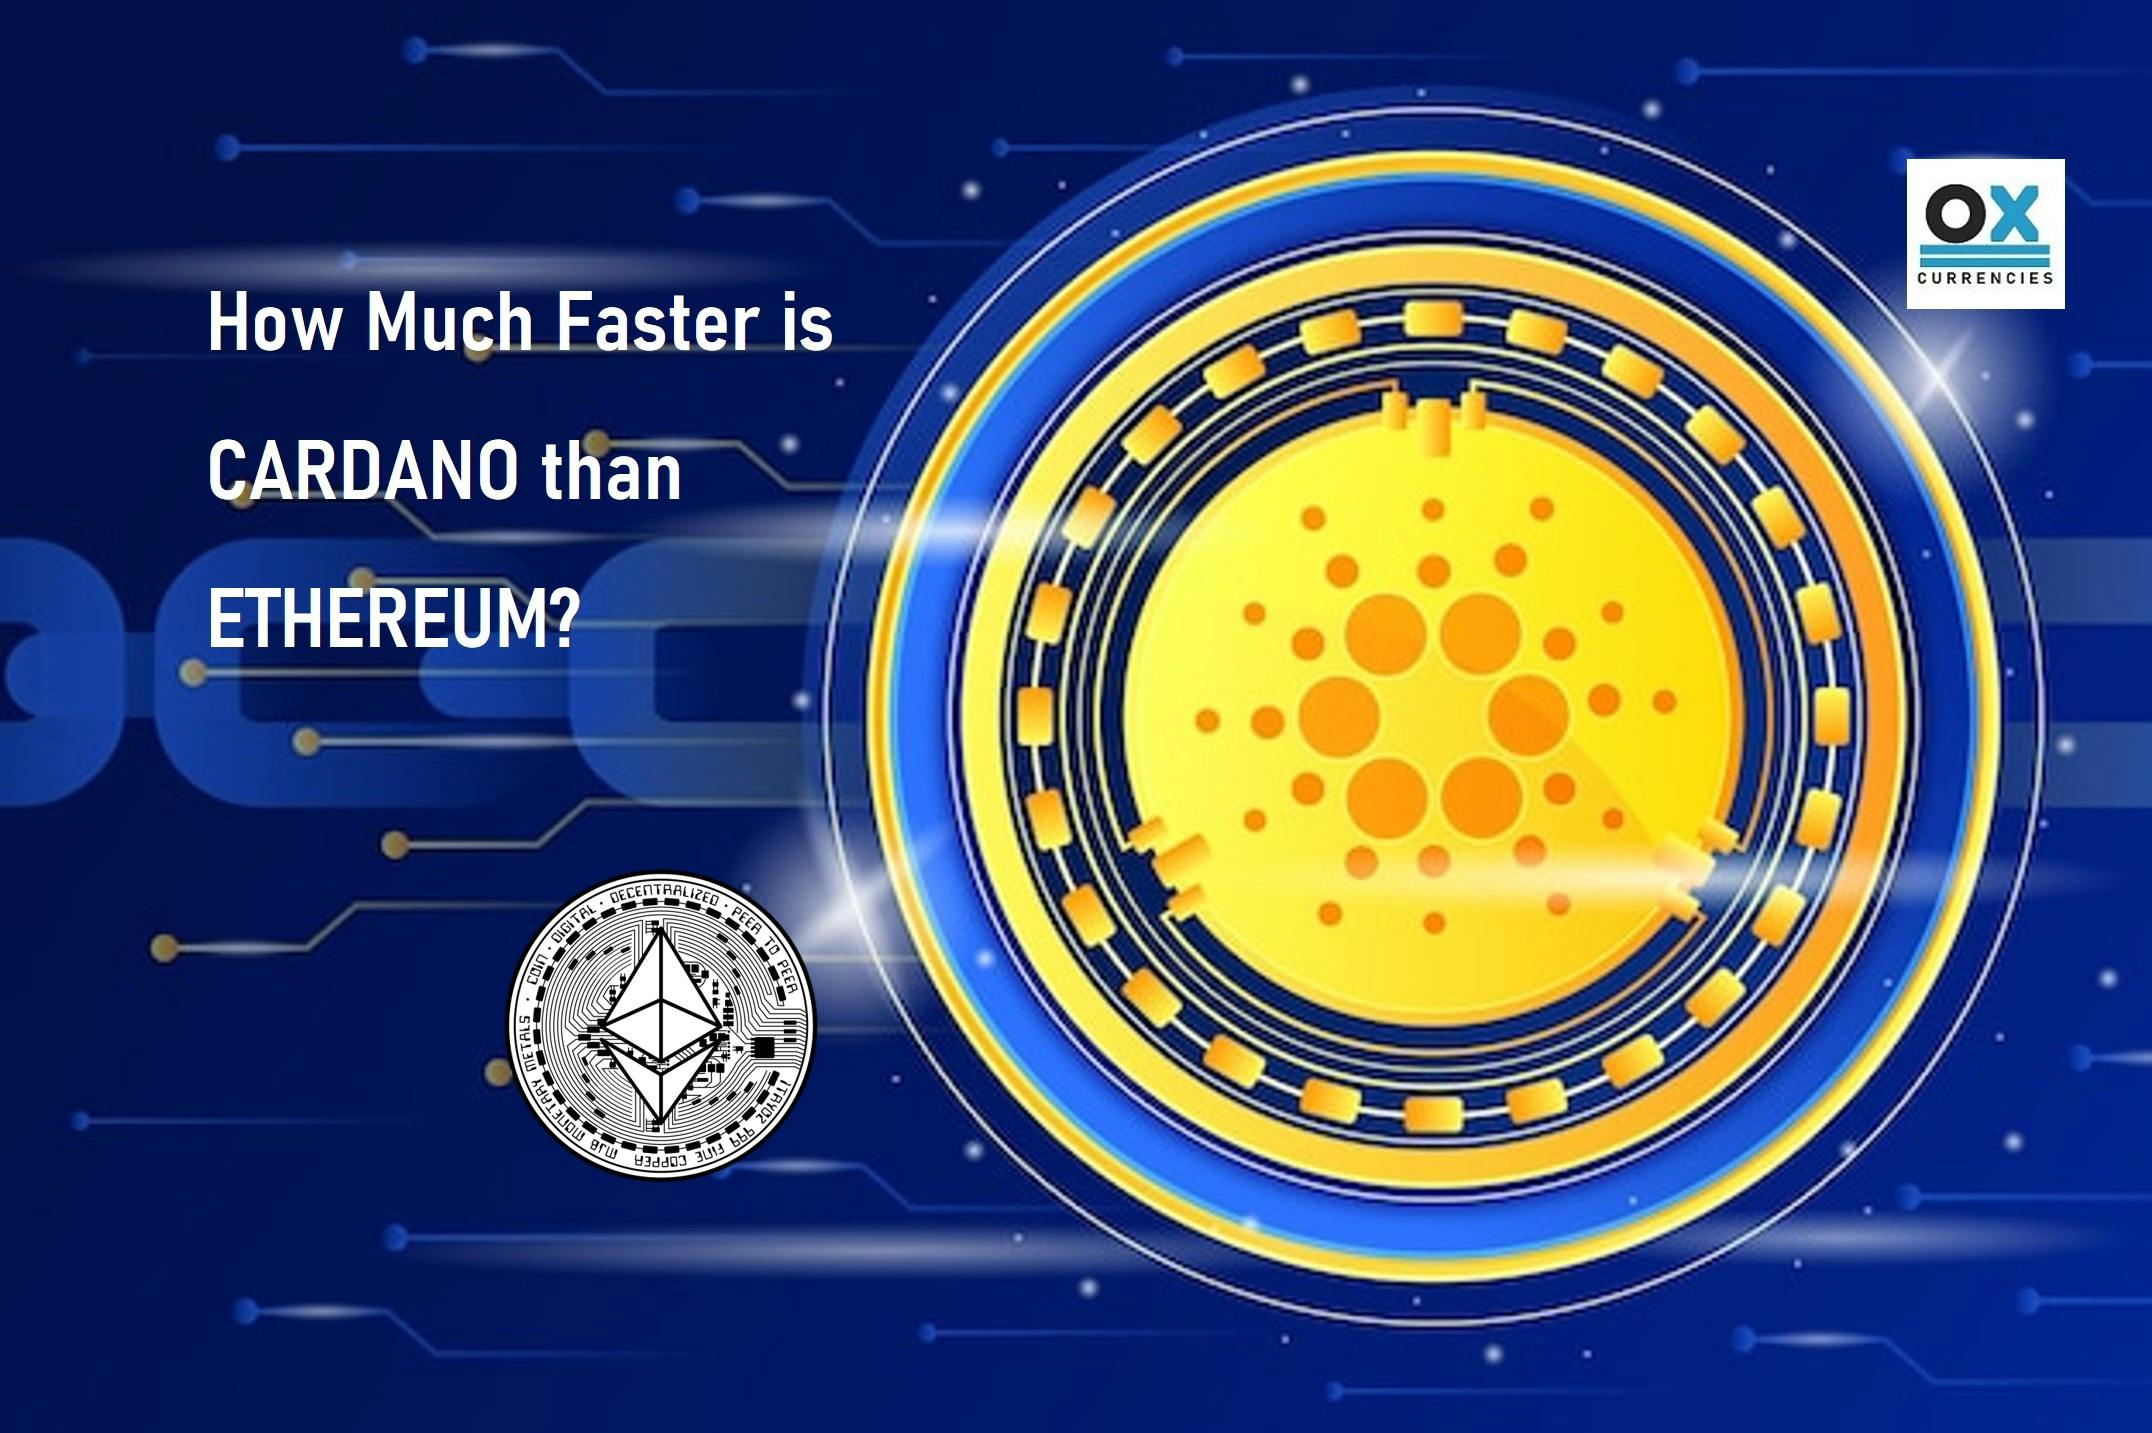 How Much Faster is Cardano than Ethereum?